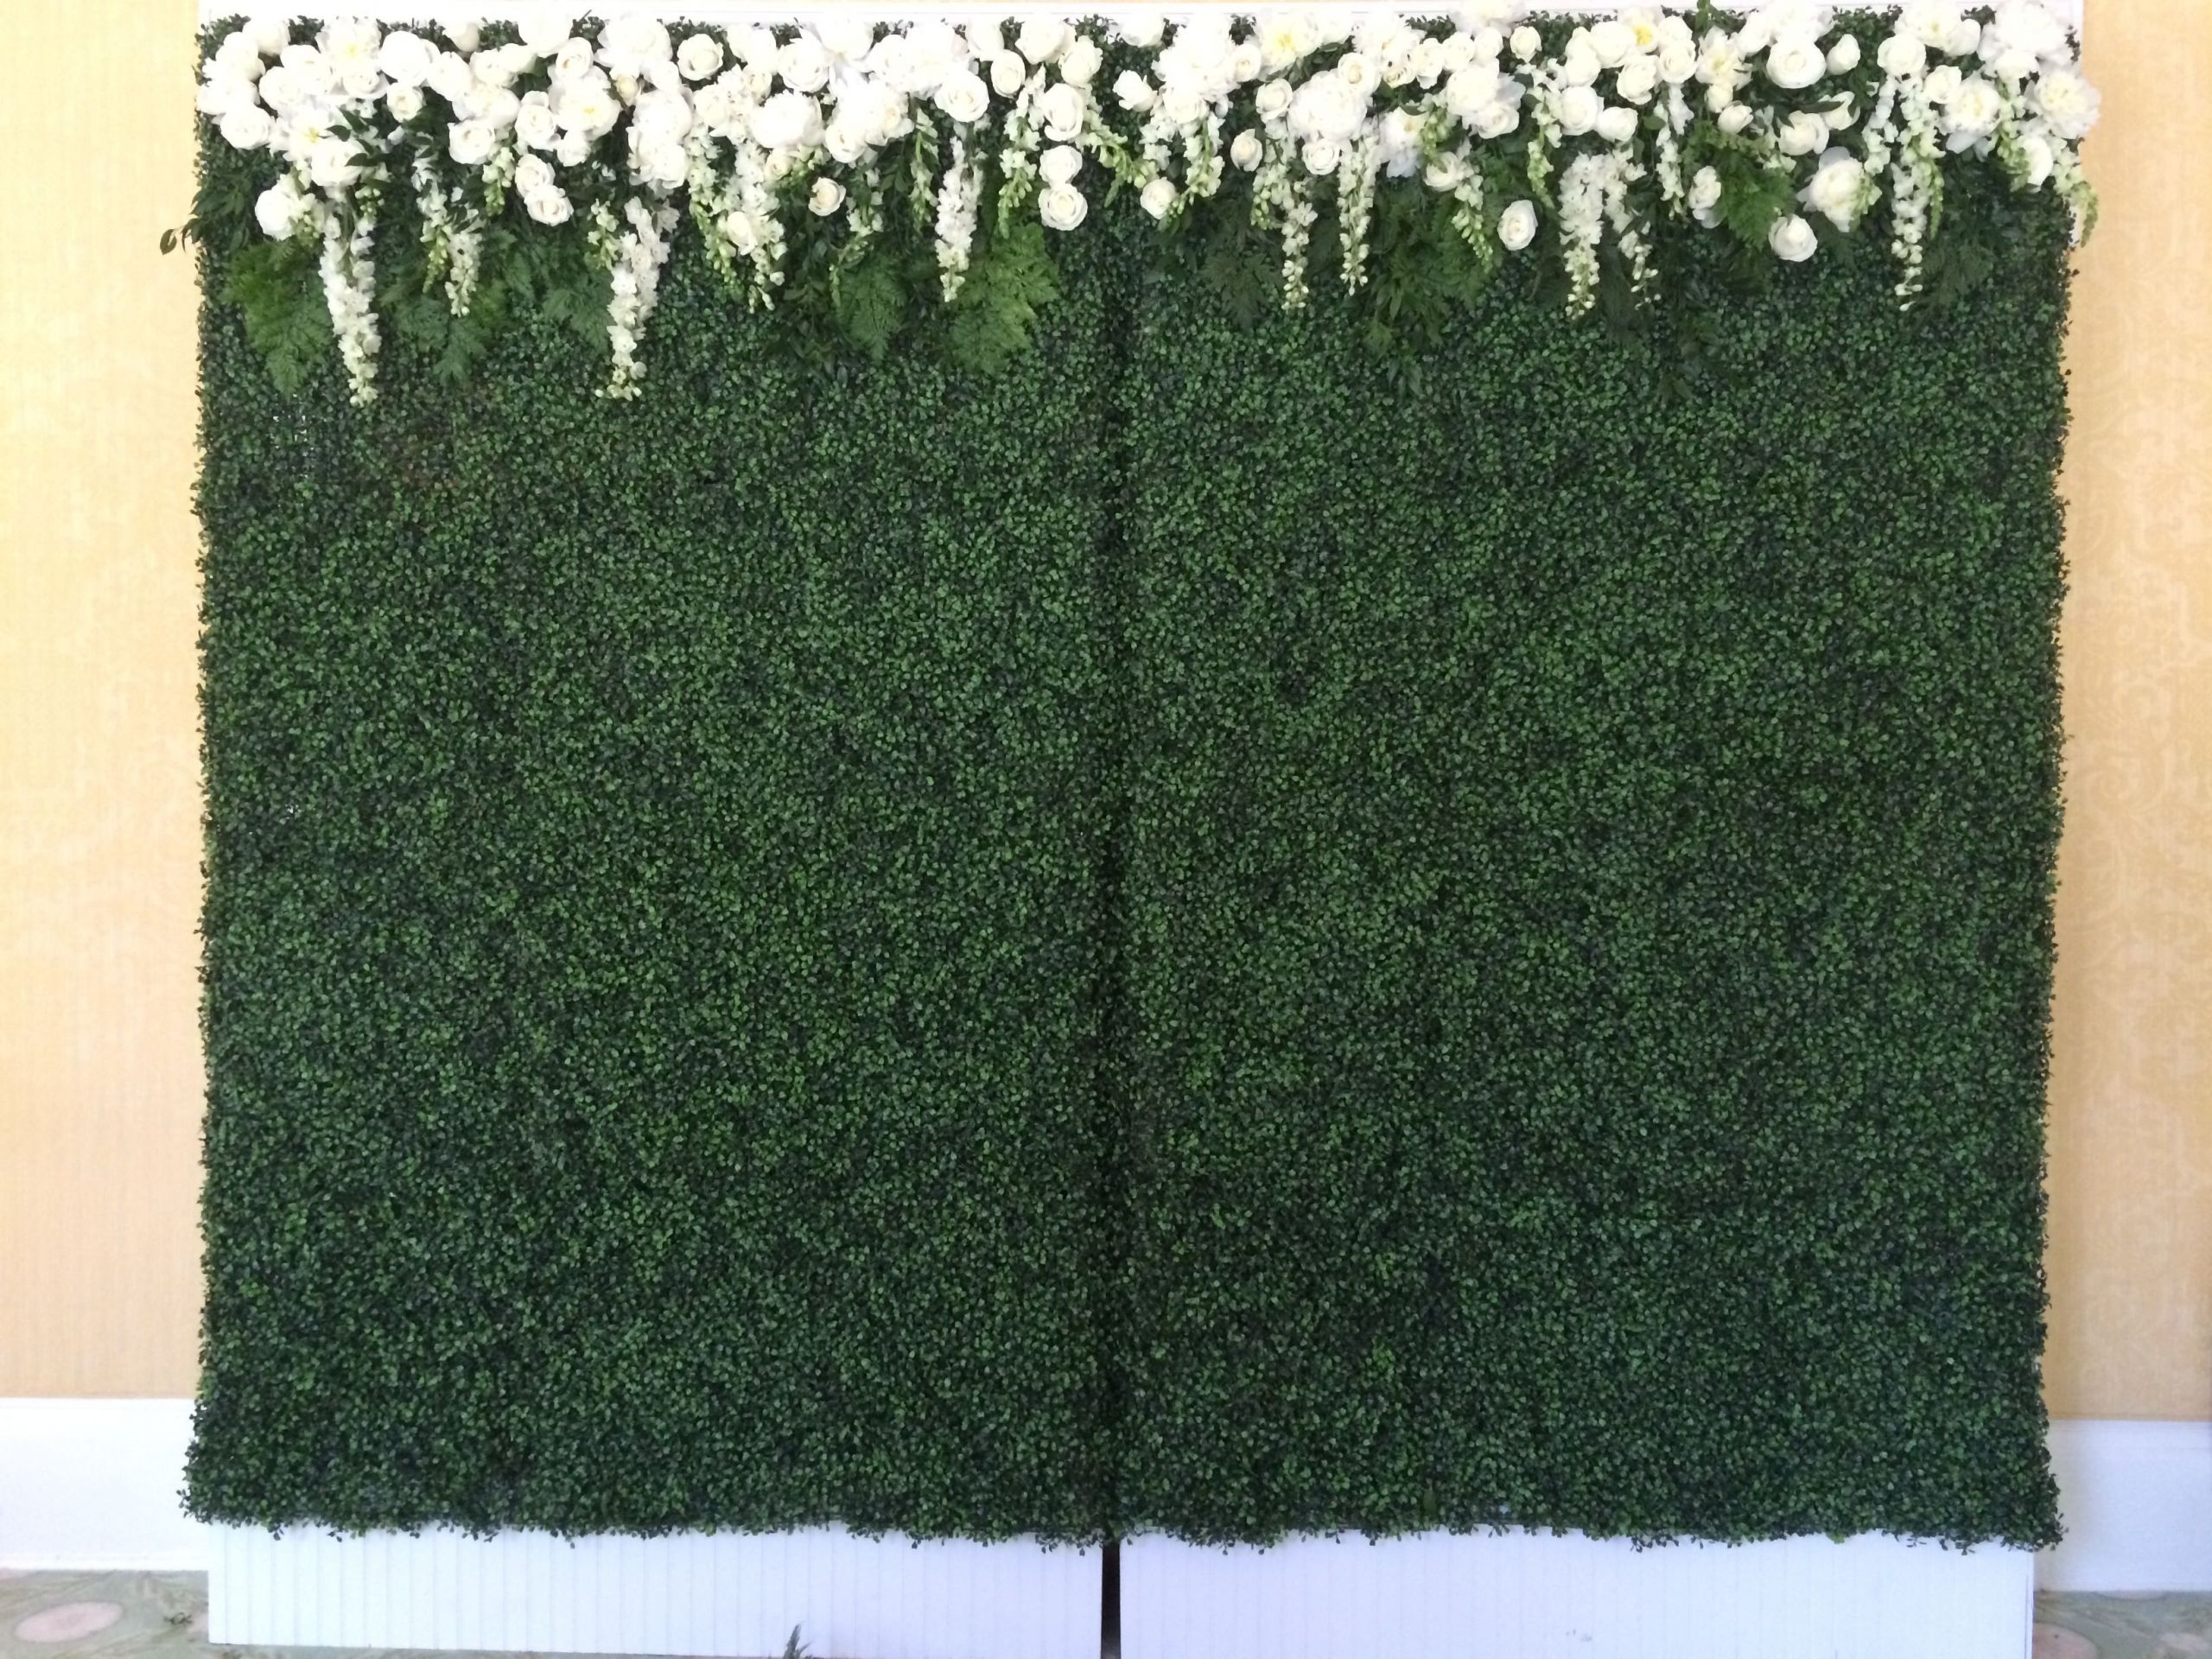 DIY Boxwood Backdrop
 Boxwood backdrop with dripping flowers in 2019